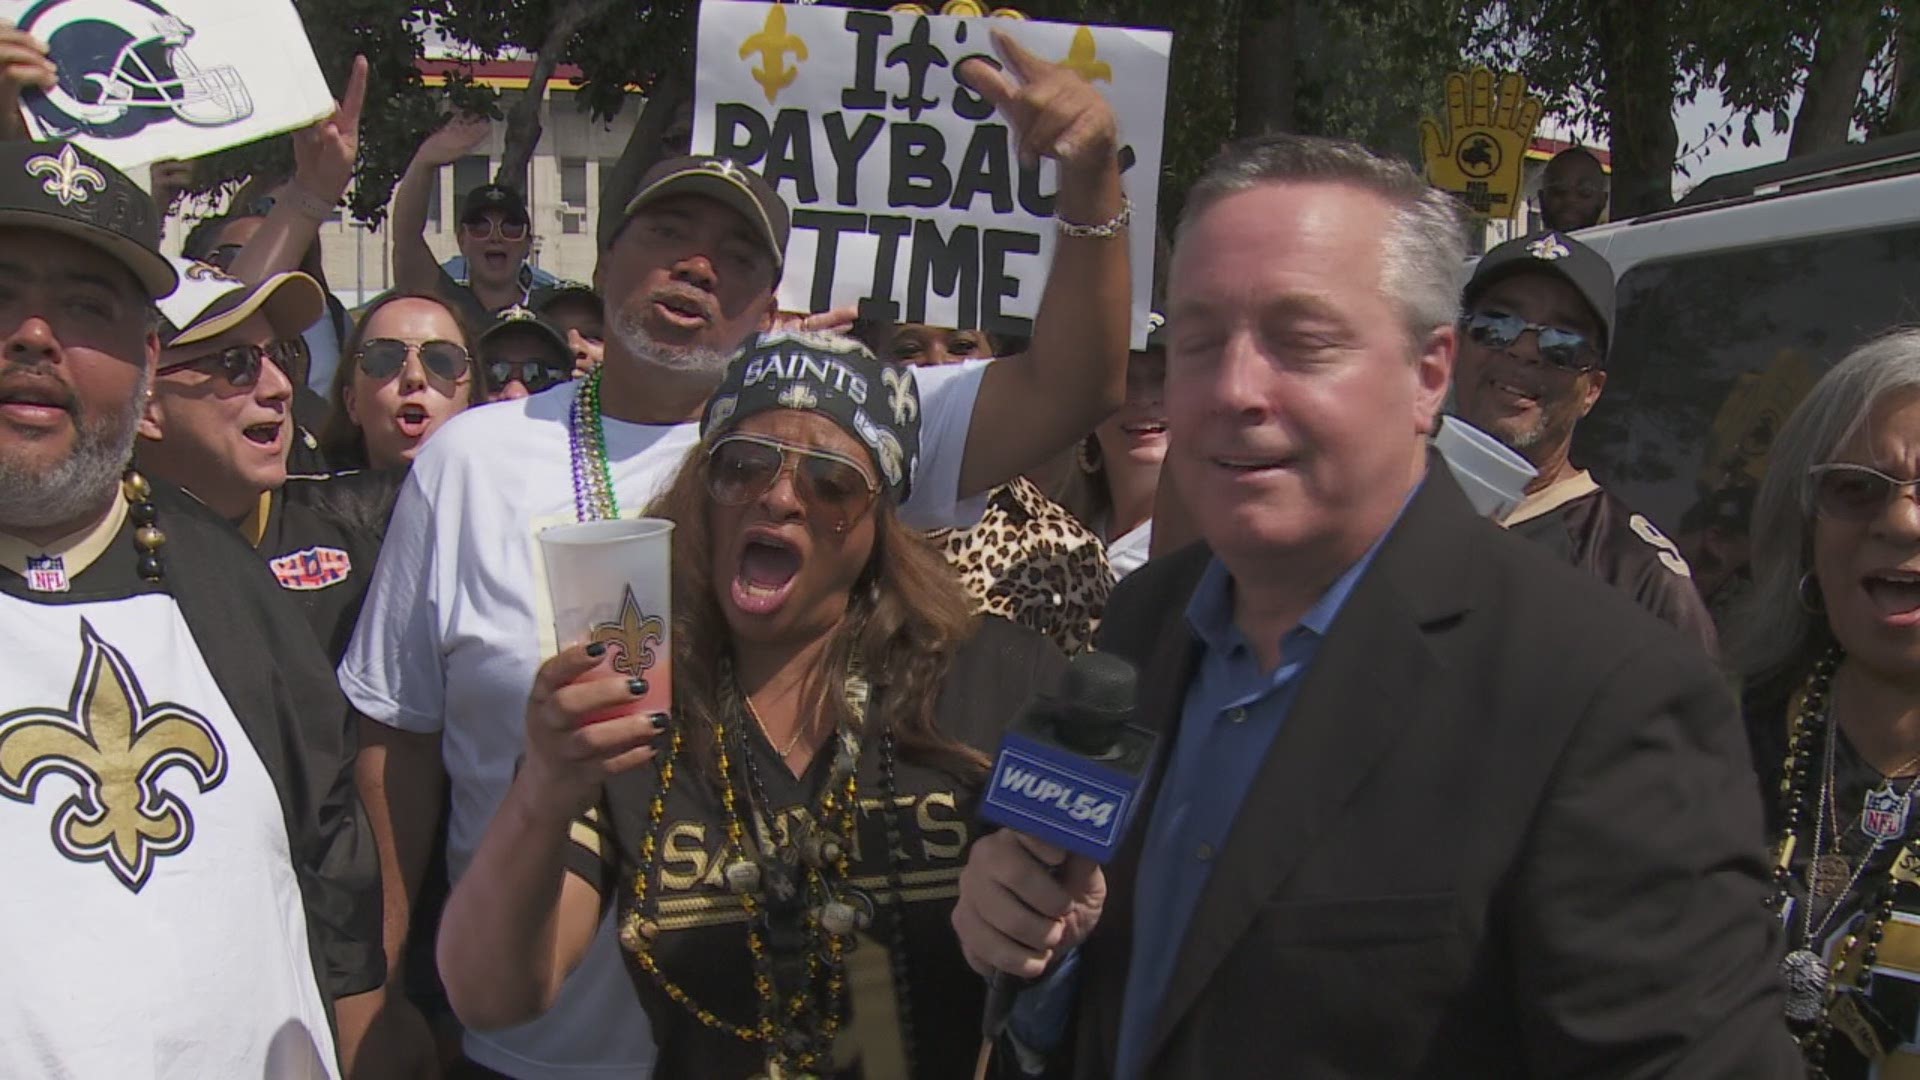 Saints fans are hosting a party in L.A. ahead of their rematch against the Rams. Kickoff starts at 3:25 p.m.